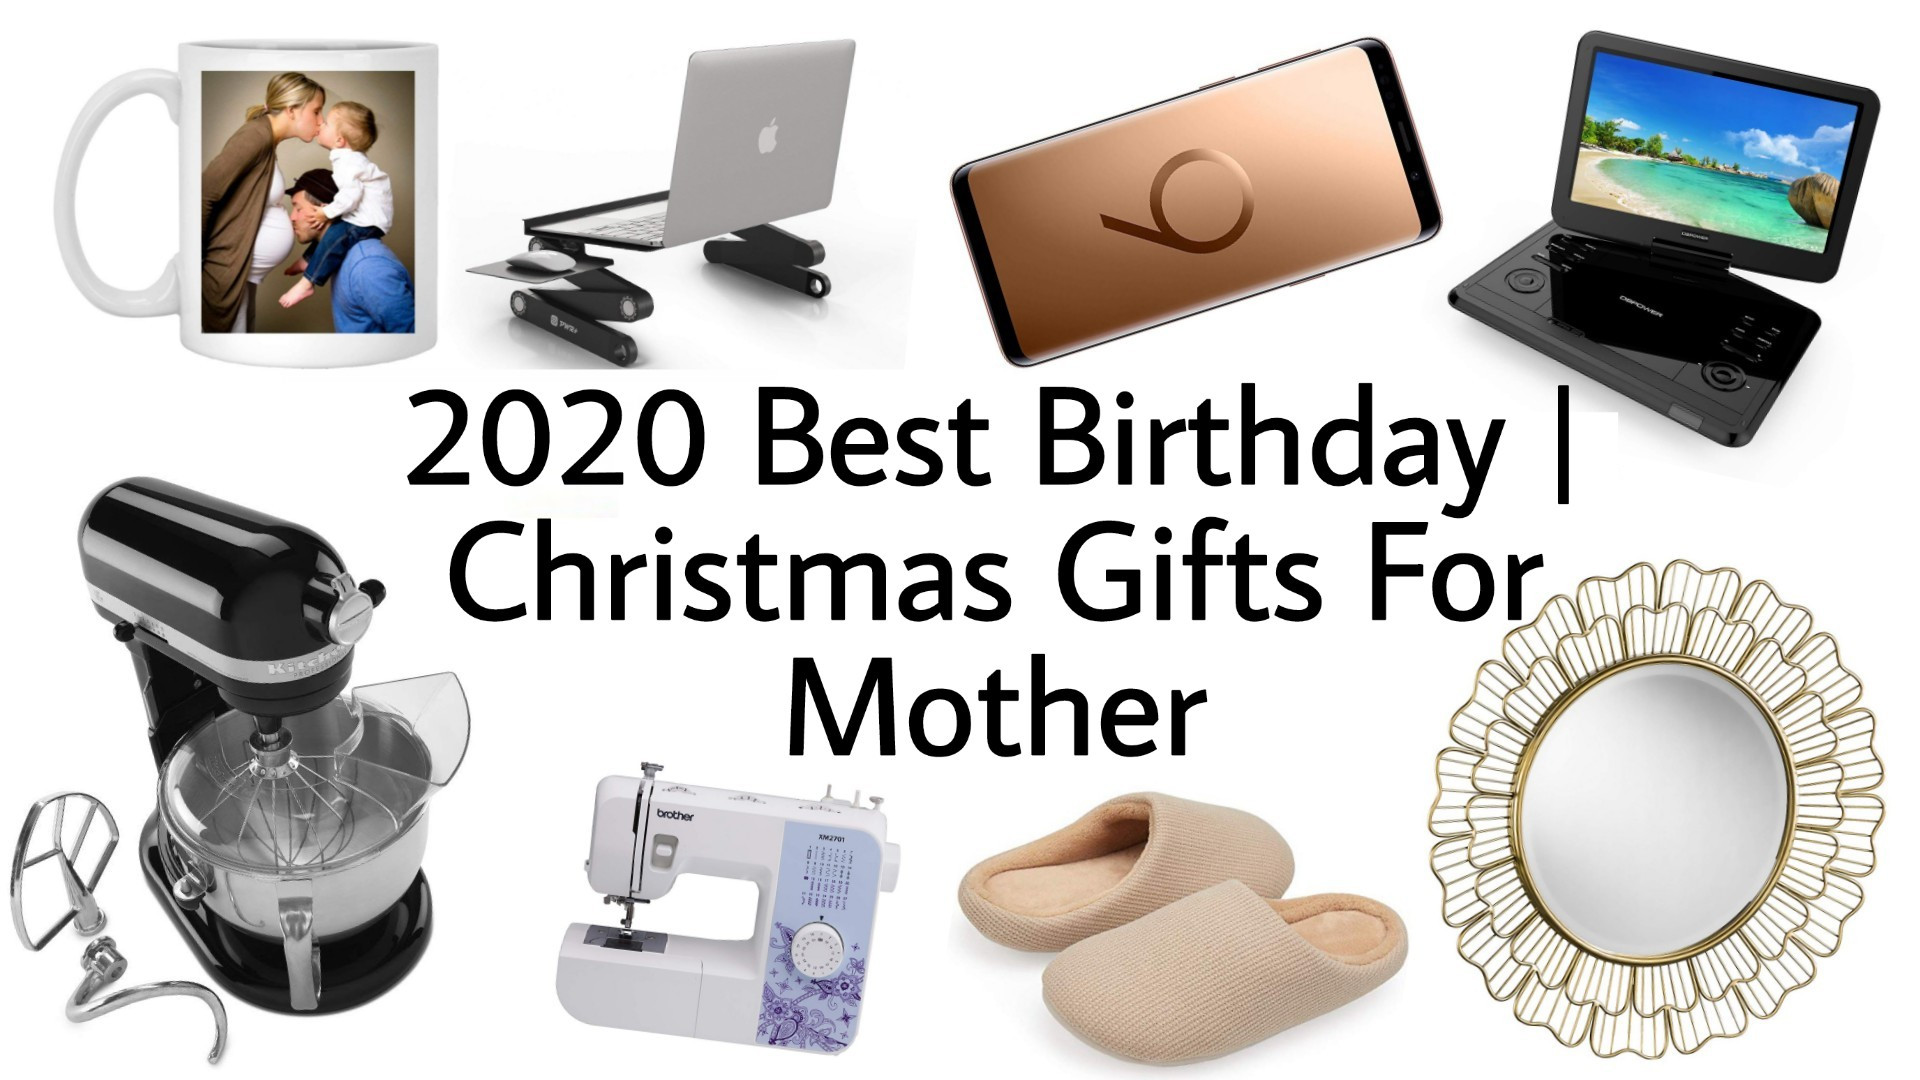 Top Holiday Gift Ideas 2020
 2020 Best Christmas Gifts for Mom